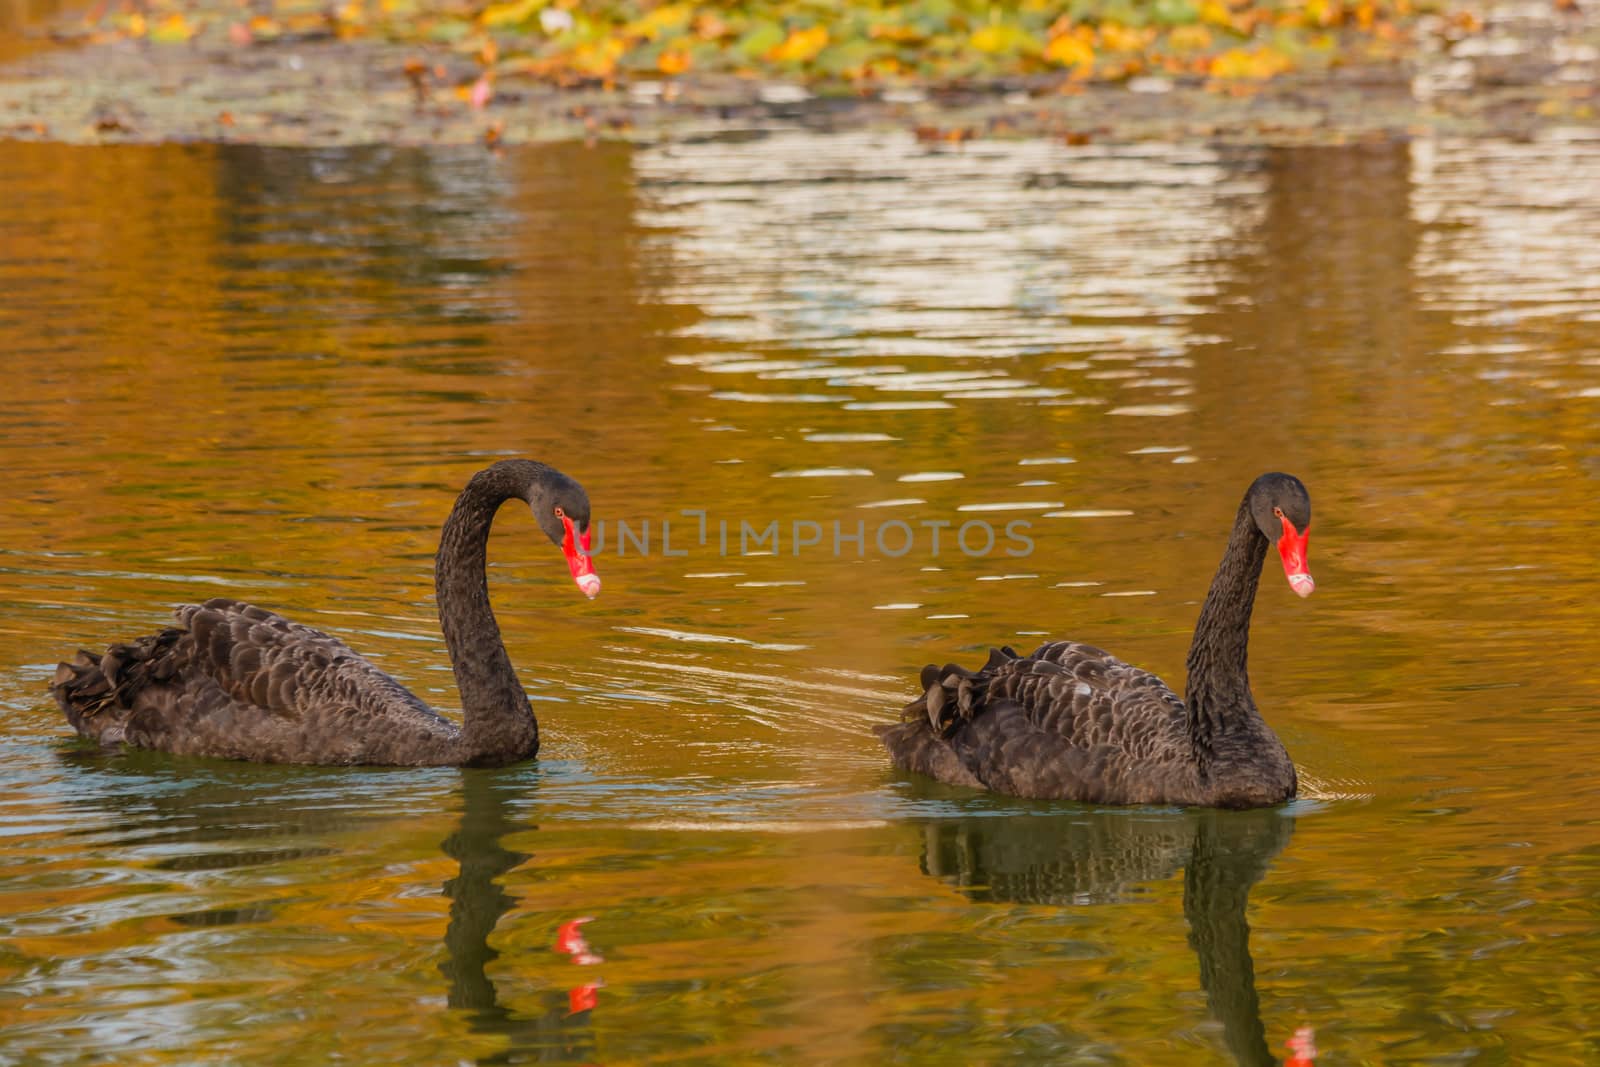 a rare exemplary of black swan exsisting in Italy by moorea